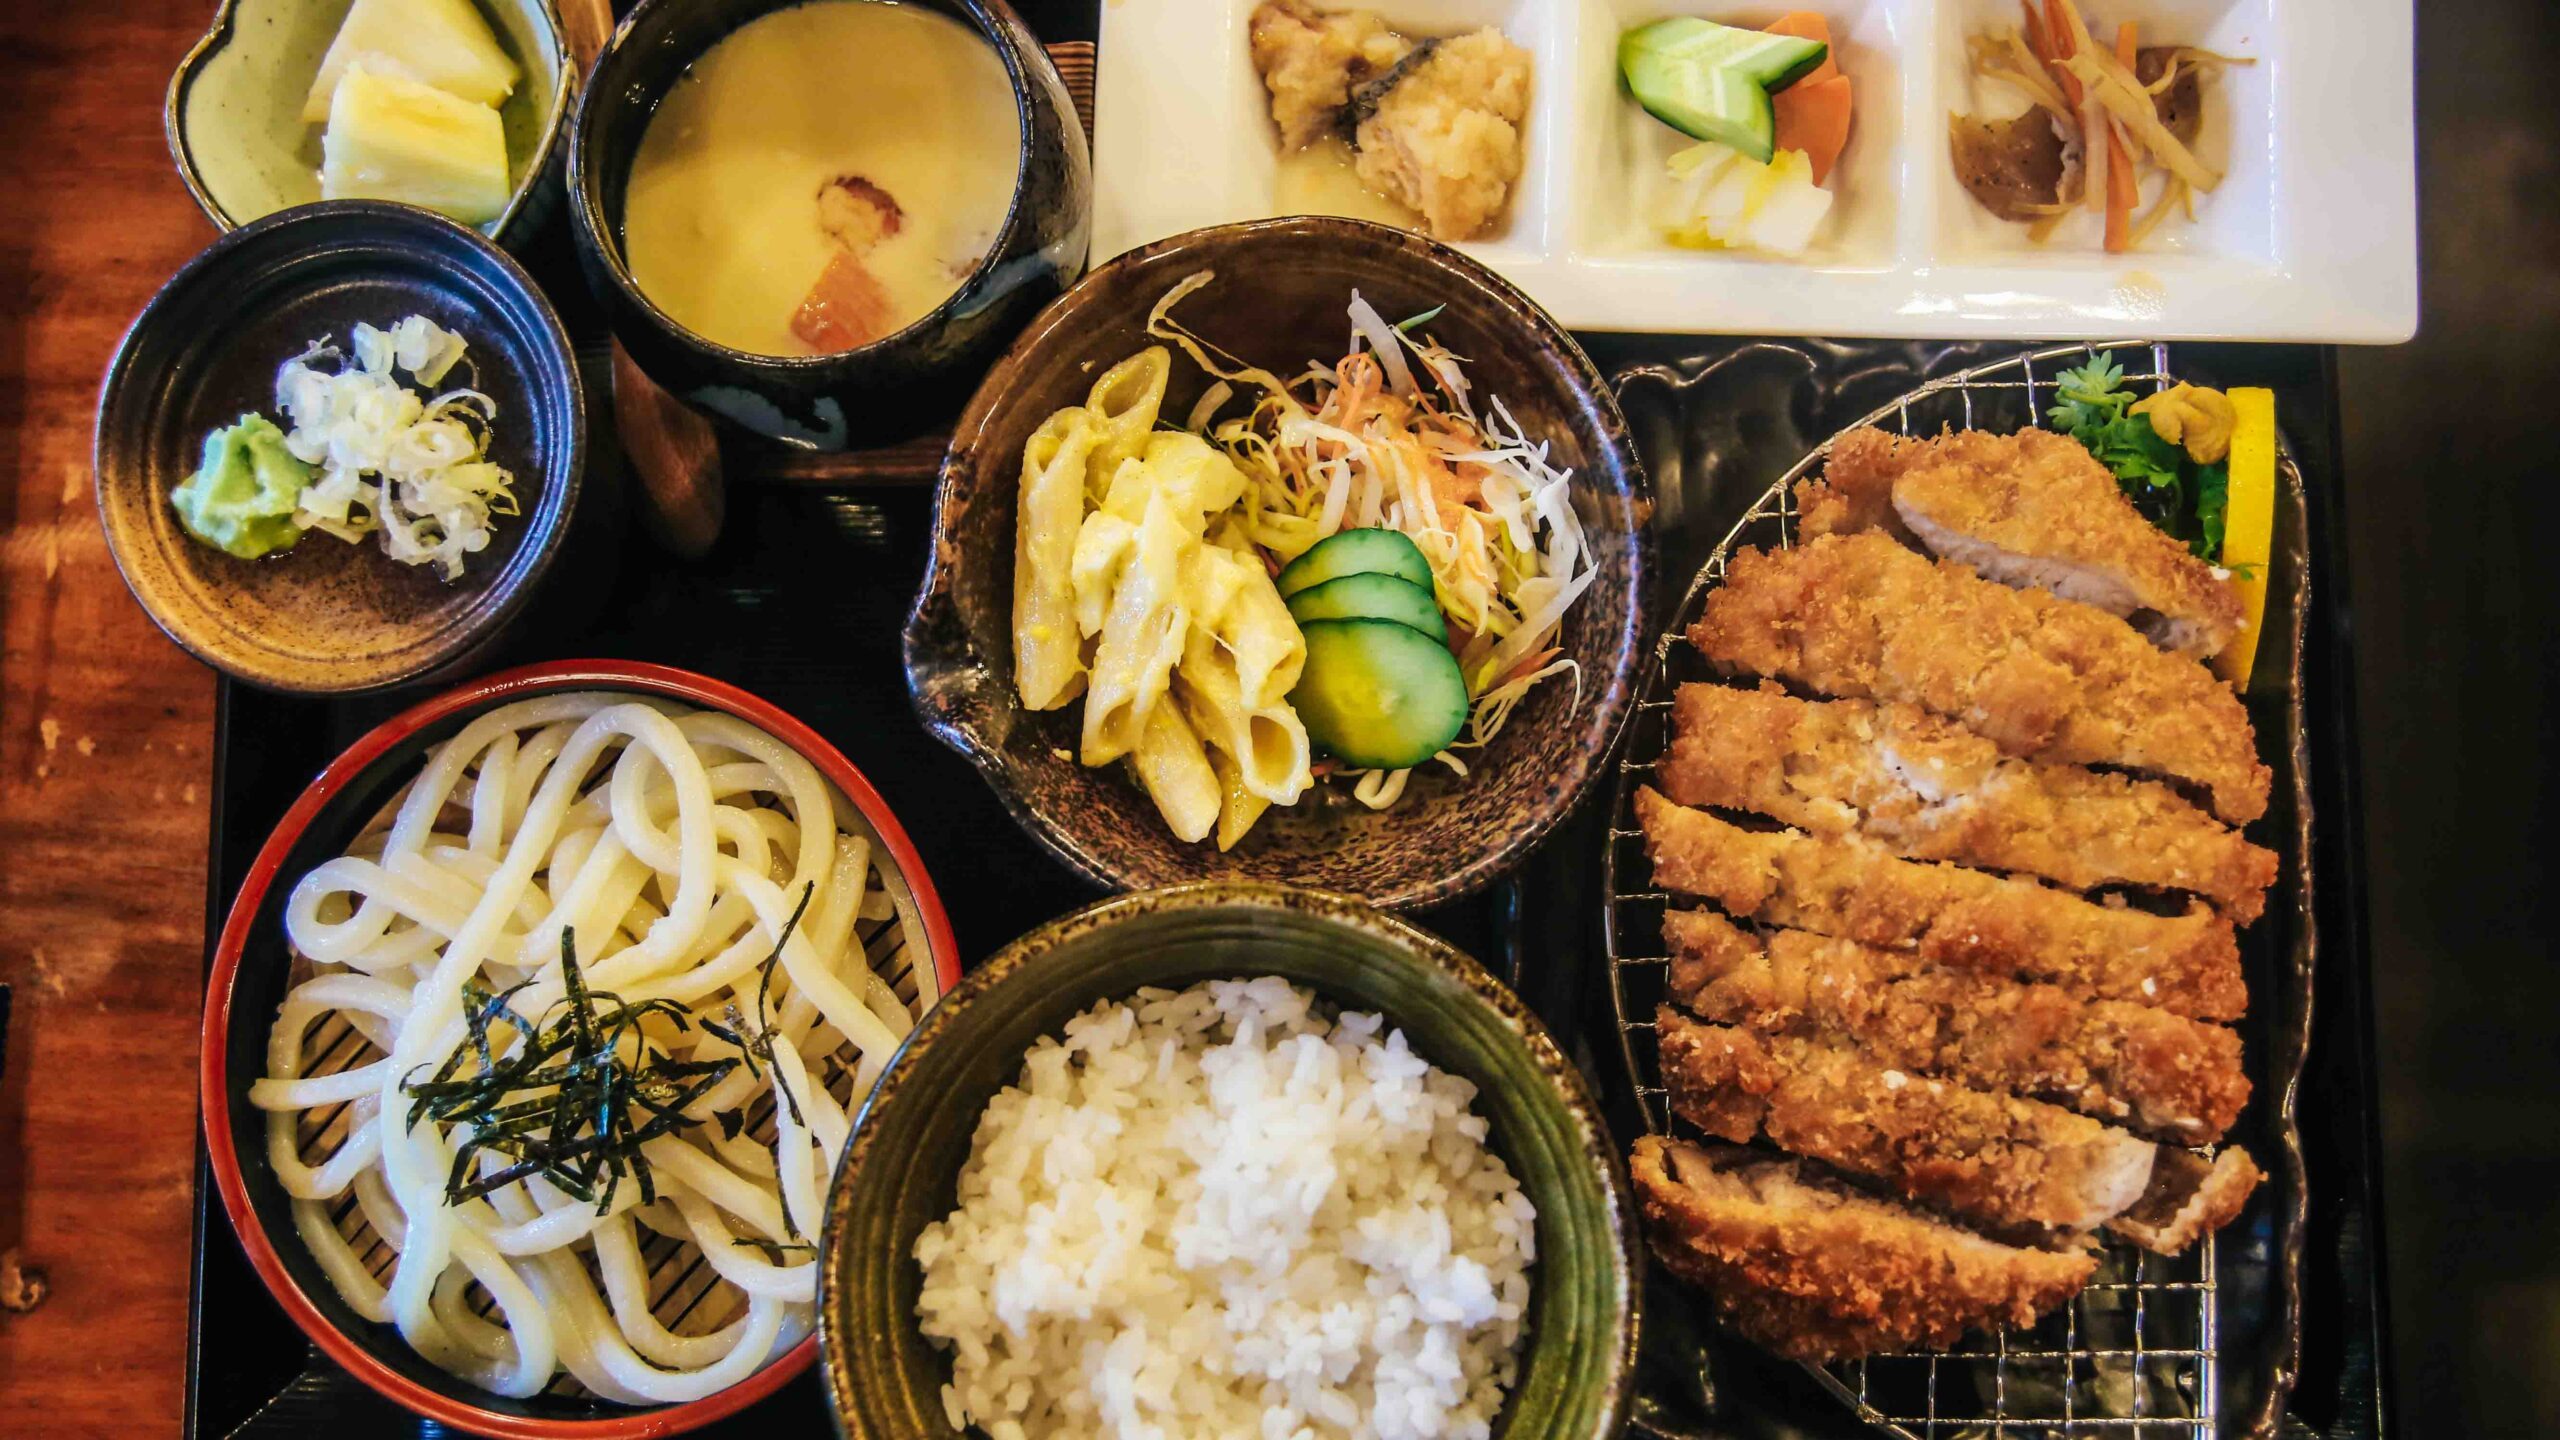 Everything we ate at Sekitori, an awesome Japanese restaurant in Pasig